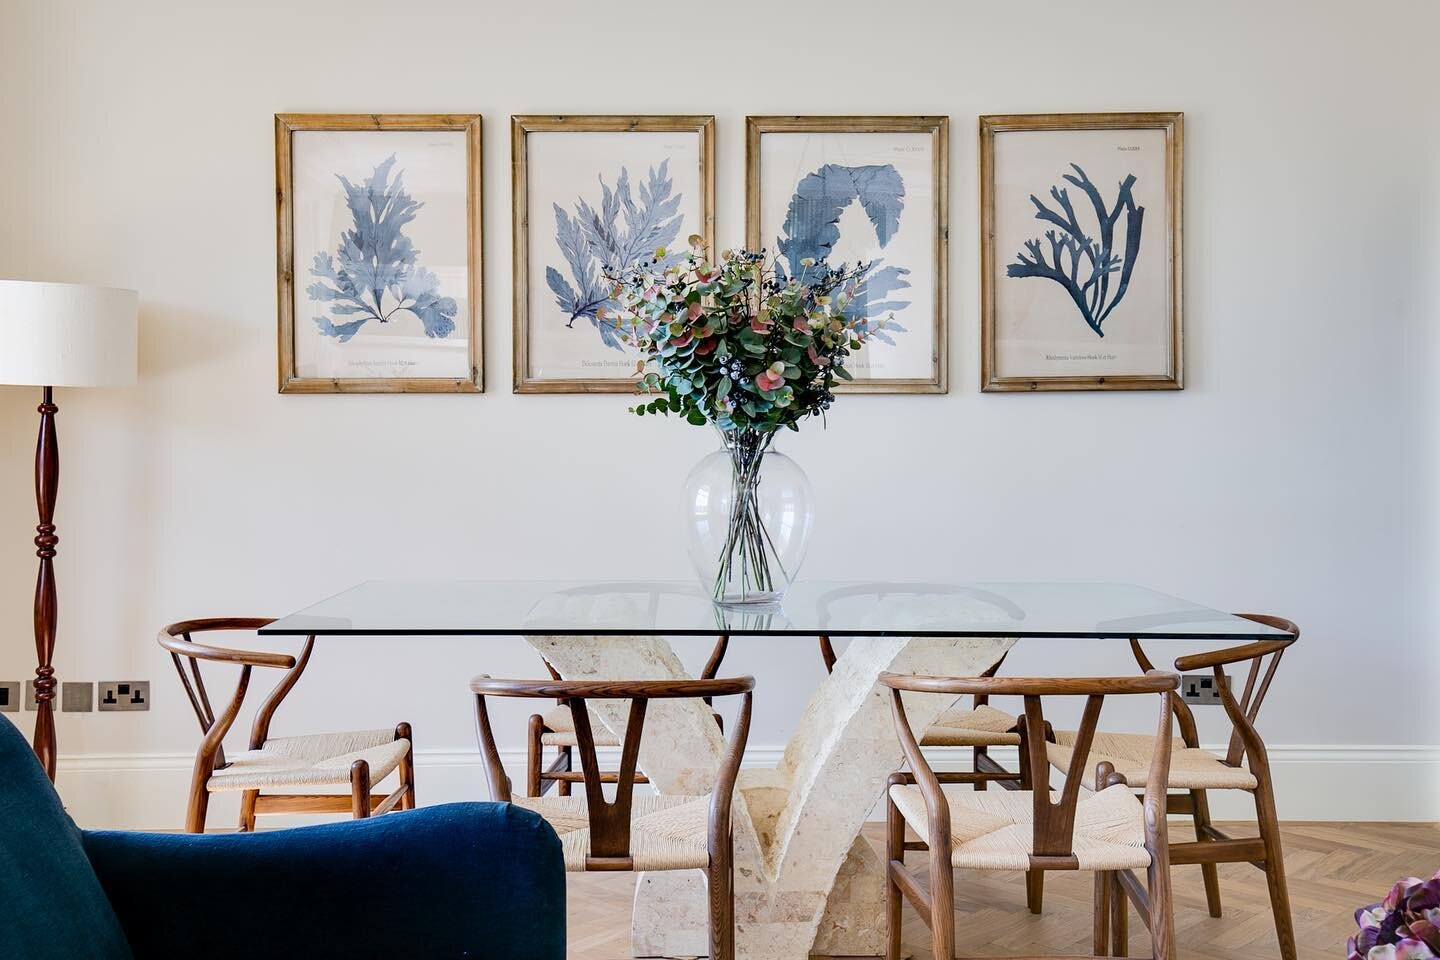 Get a look at this contemporary dining room space. We love how the blue artwork ties with the velvet sofa 👌🏼 

Keep your eyes peeled for more hot shots like coming this week 😎